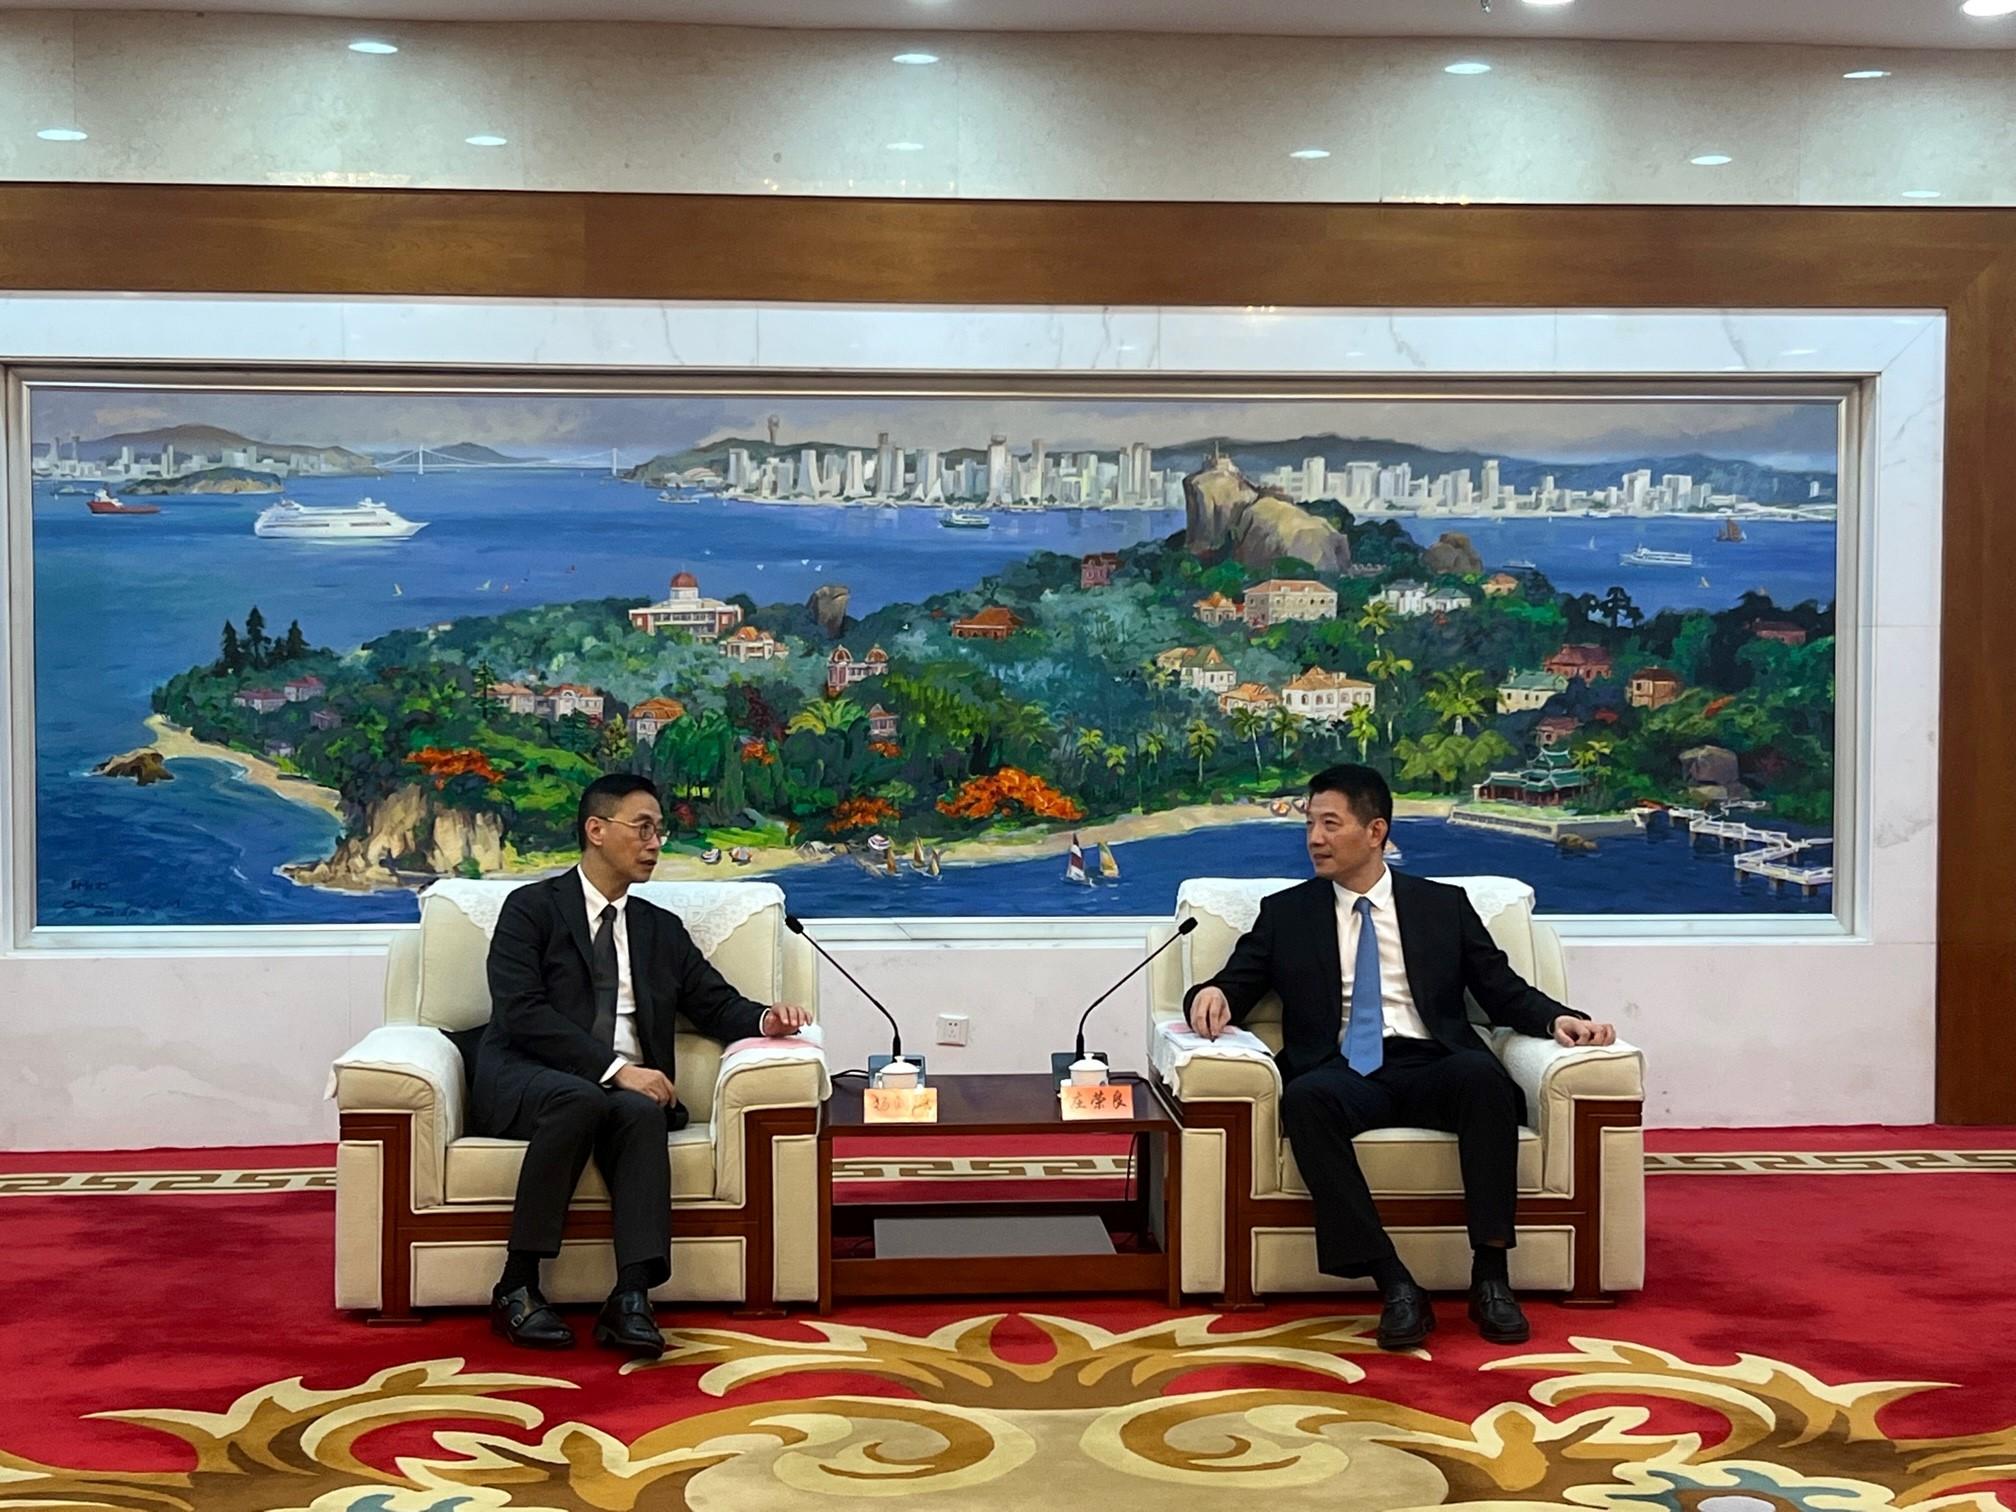 The Secretary for Culture, Sports and Tourism, Mr Kevin Yeung (left), met with Vice Mayor of the Xiamen Municipal People's Government Mr Zhuang Rongliang (right), today (November 1) in Xiamen to share their experiences in promoting tourism and cultural development, and explore opportunities in strengthening exchanges and co-operation.